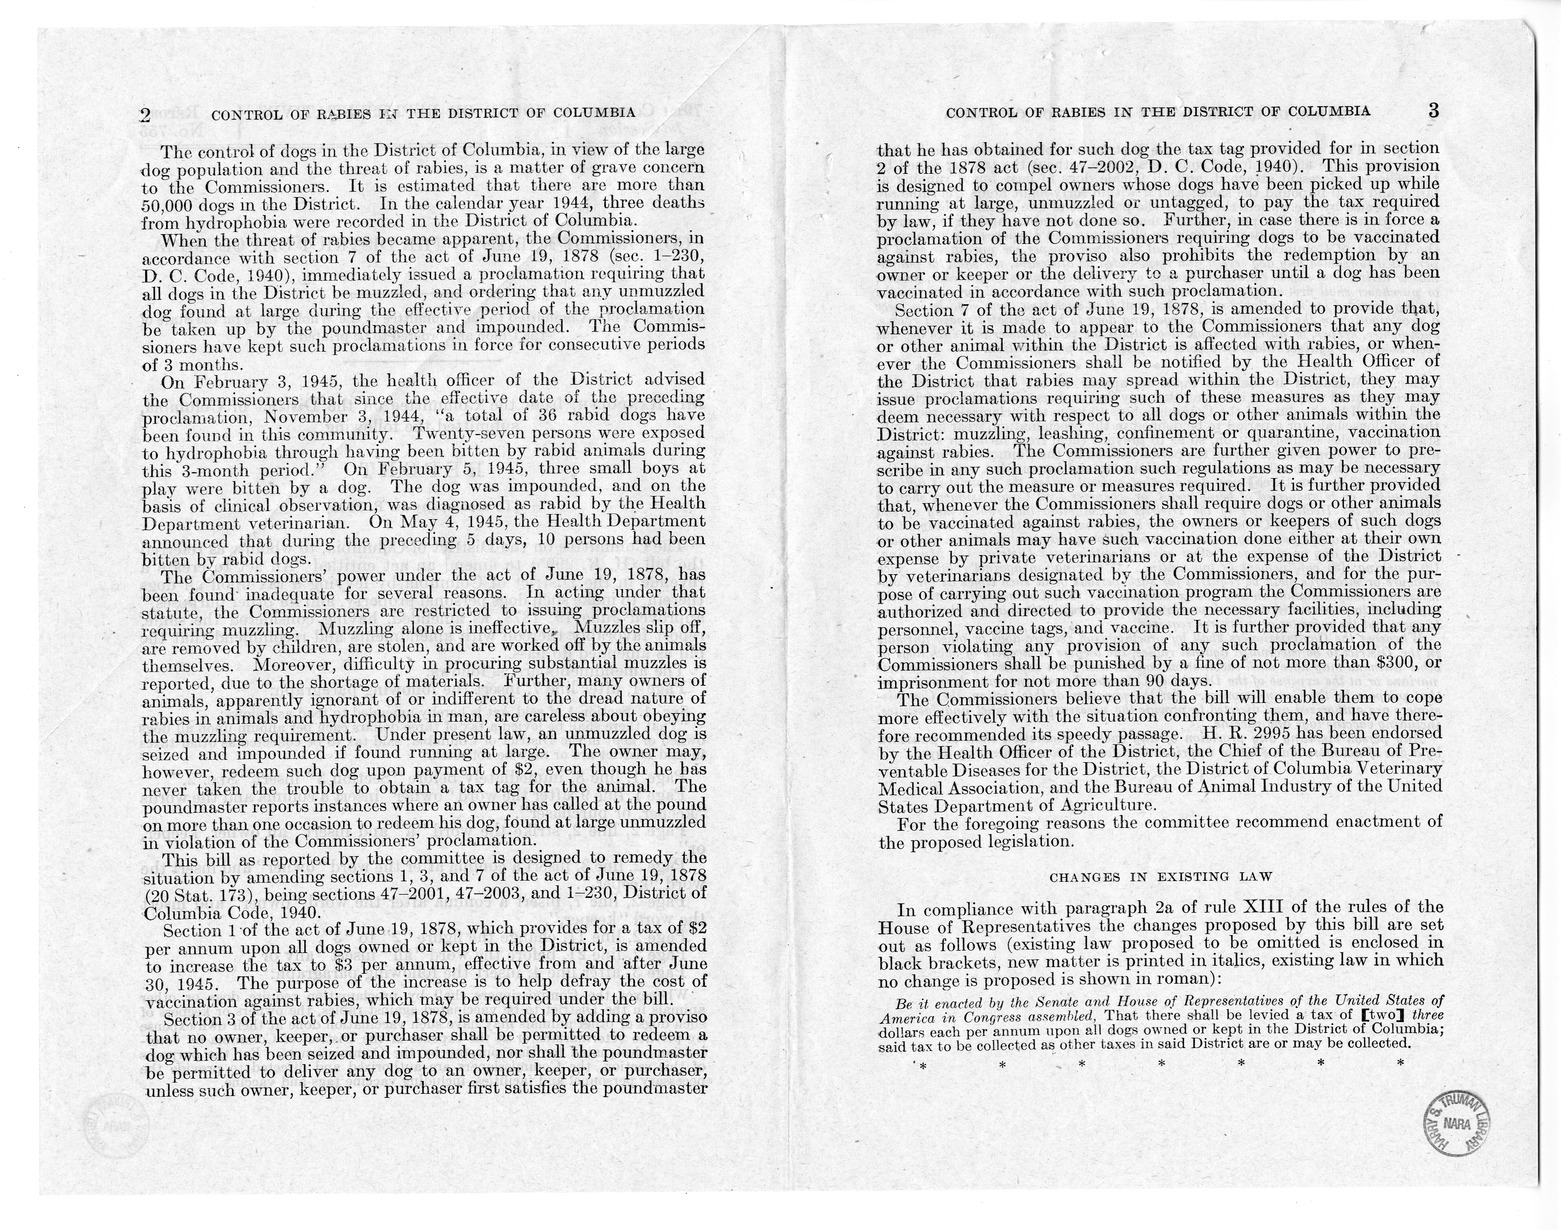 Memorandum from Frederick Bailey to M. C. Latta, H.R. 2995, To Amend An Act to Create a Revenue in the District of Columbia by Levying a Tax Upon all Dogs Therein, to Make Such Dogs Personal Property, and for Other Purposes, with Attachments